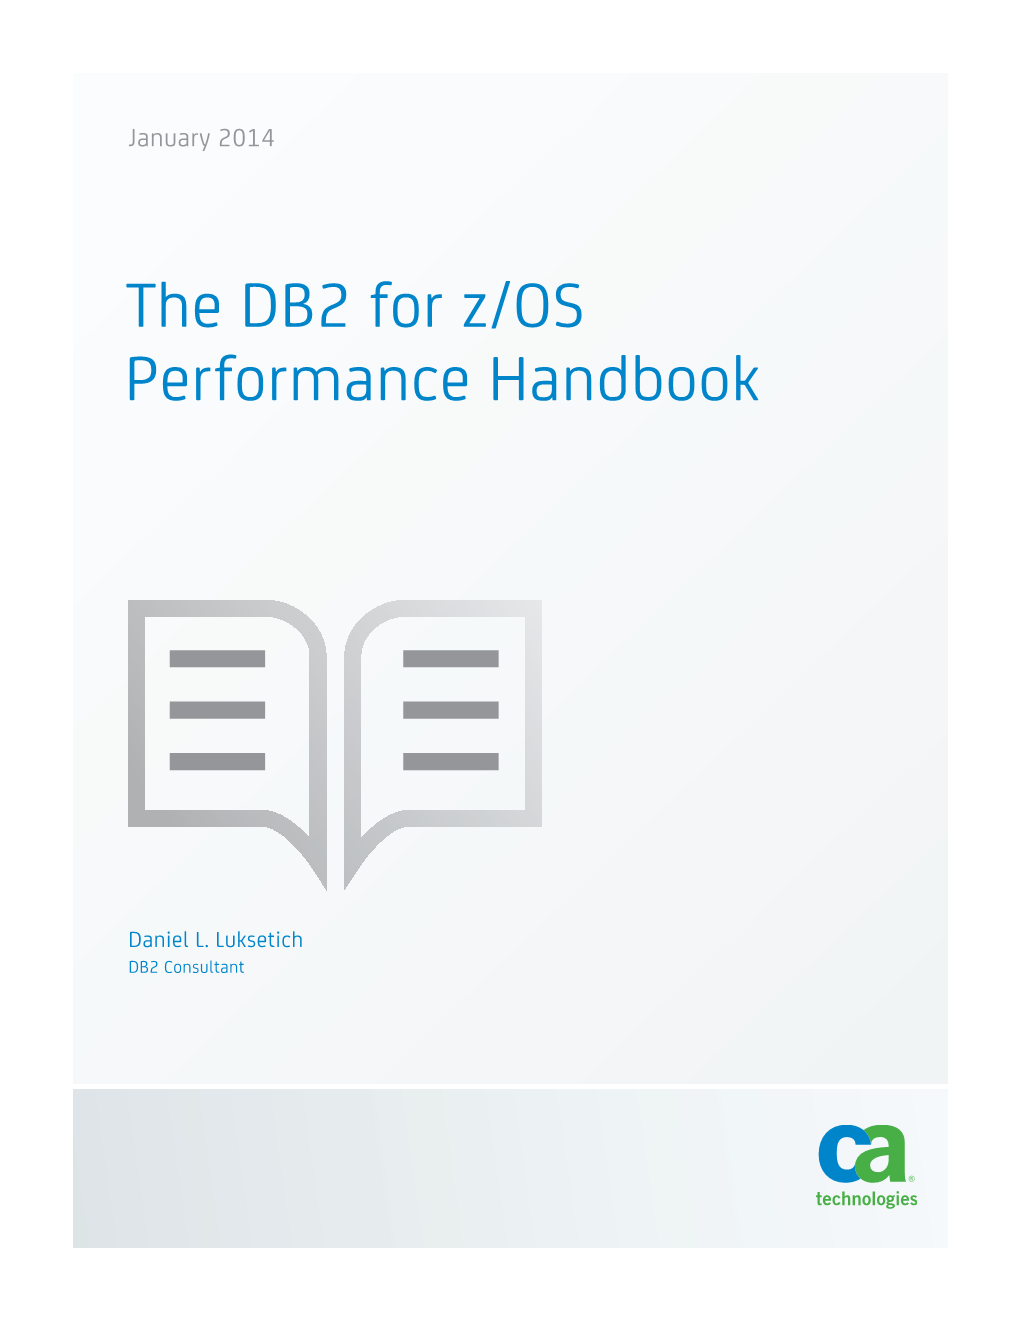 The DB2 for Z/OS Performance Handbook